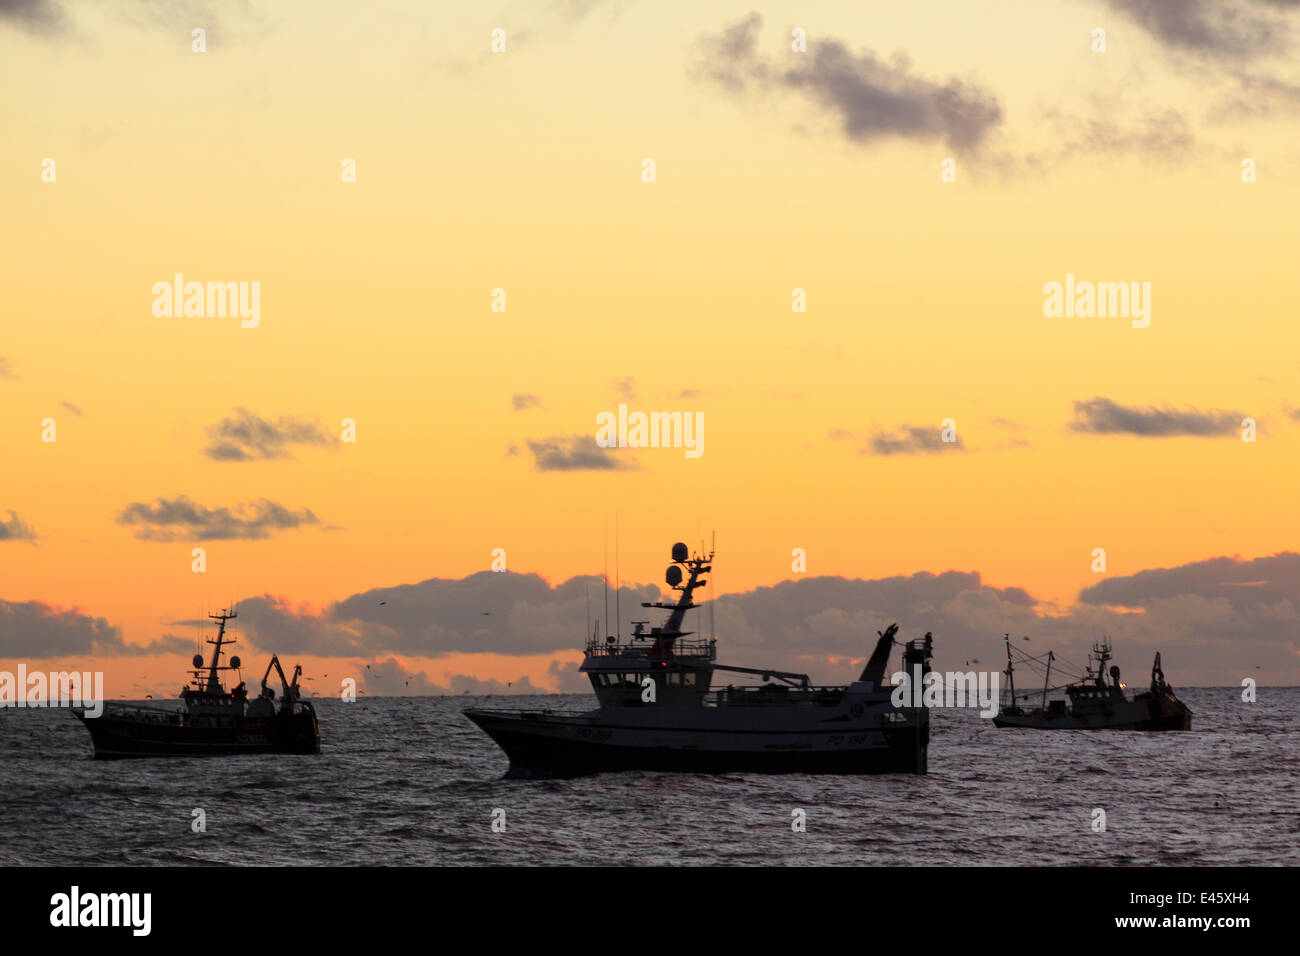 Fishing vessels at dusk on the North Sea, Europe, November 2010. Stock Photo